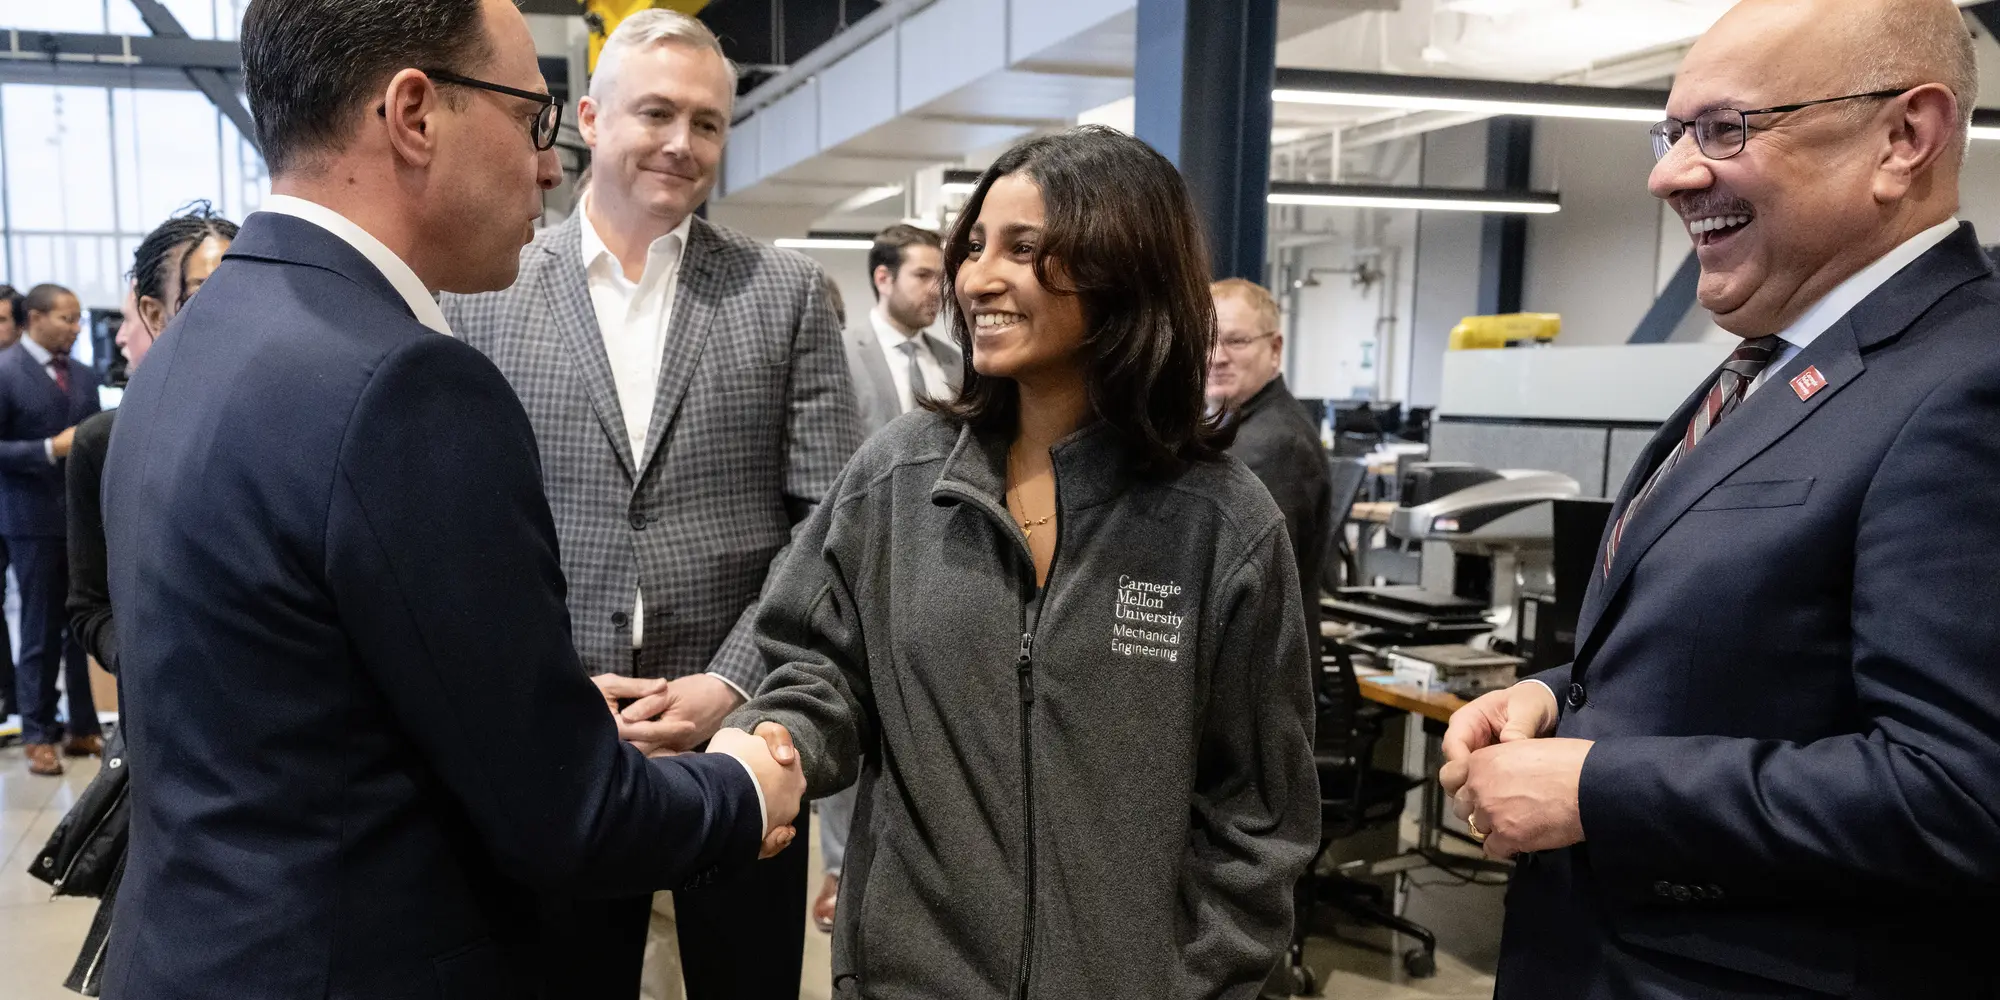 Gov. Shapiro greets Aparna Nair, a recent CMU graduate who works at the ARM Institute.